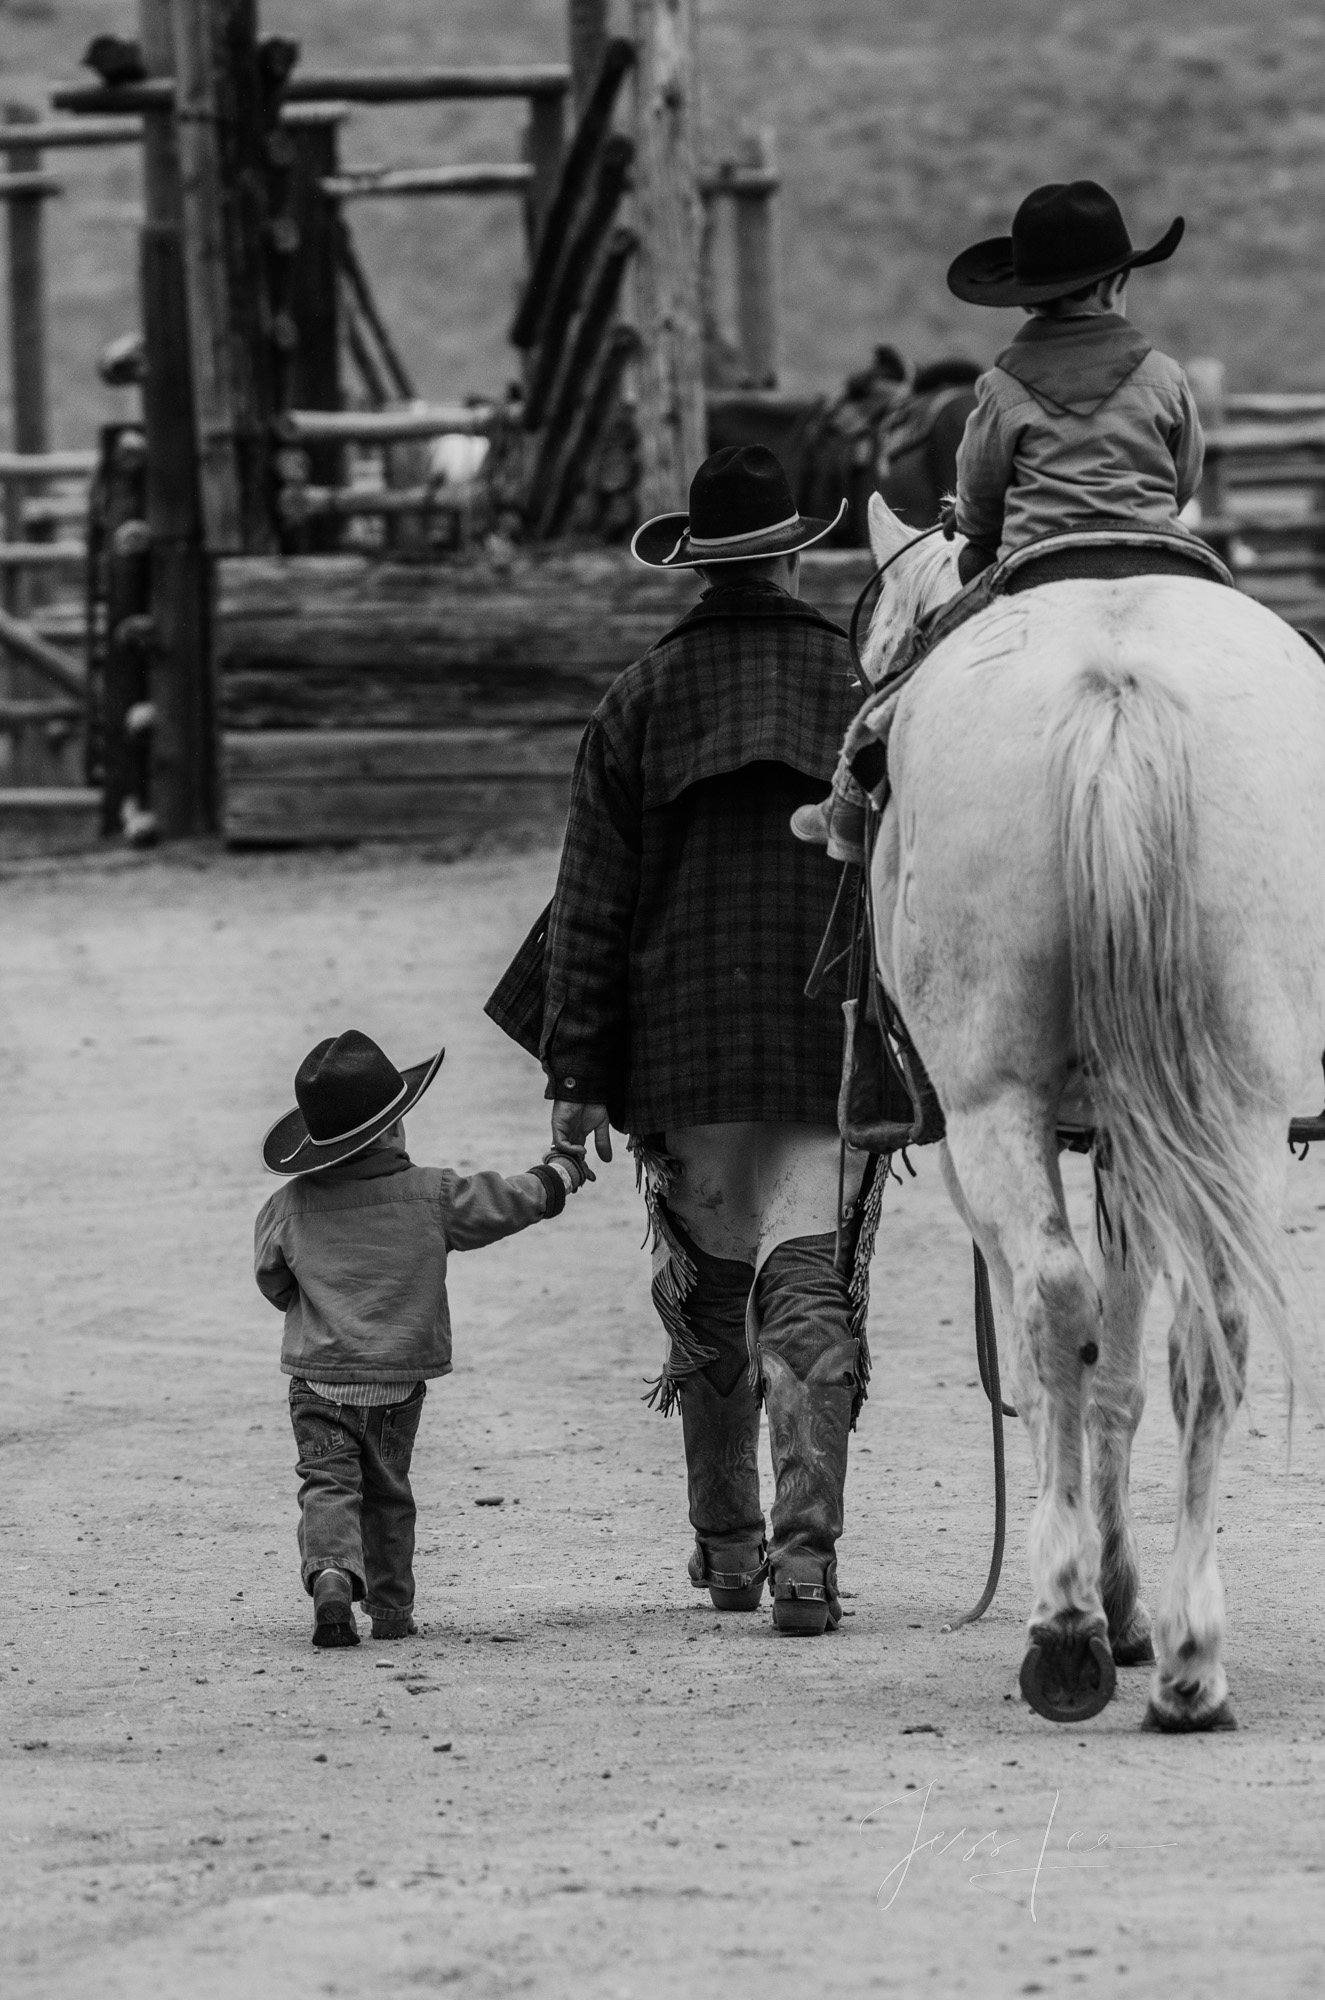 Fine Art Limited Edition Photo Prints of Cowboys, Horses, and life in the West. Starting Early. A Cowboy picture in black and...